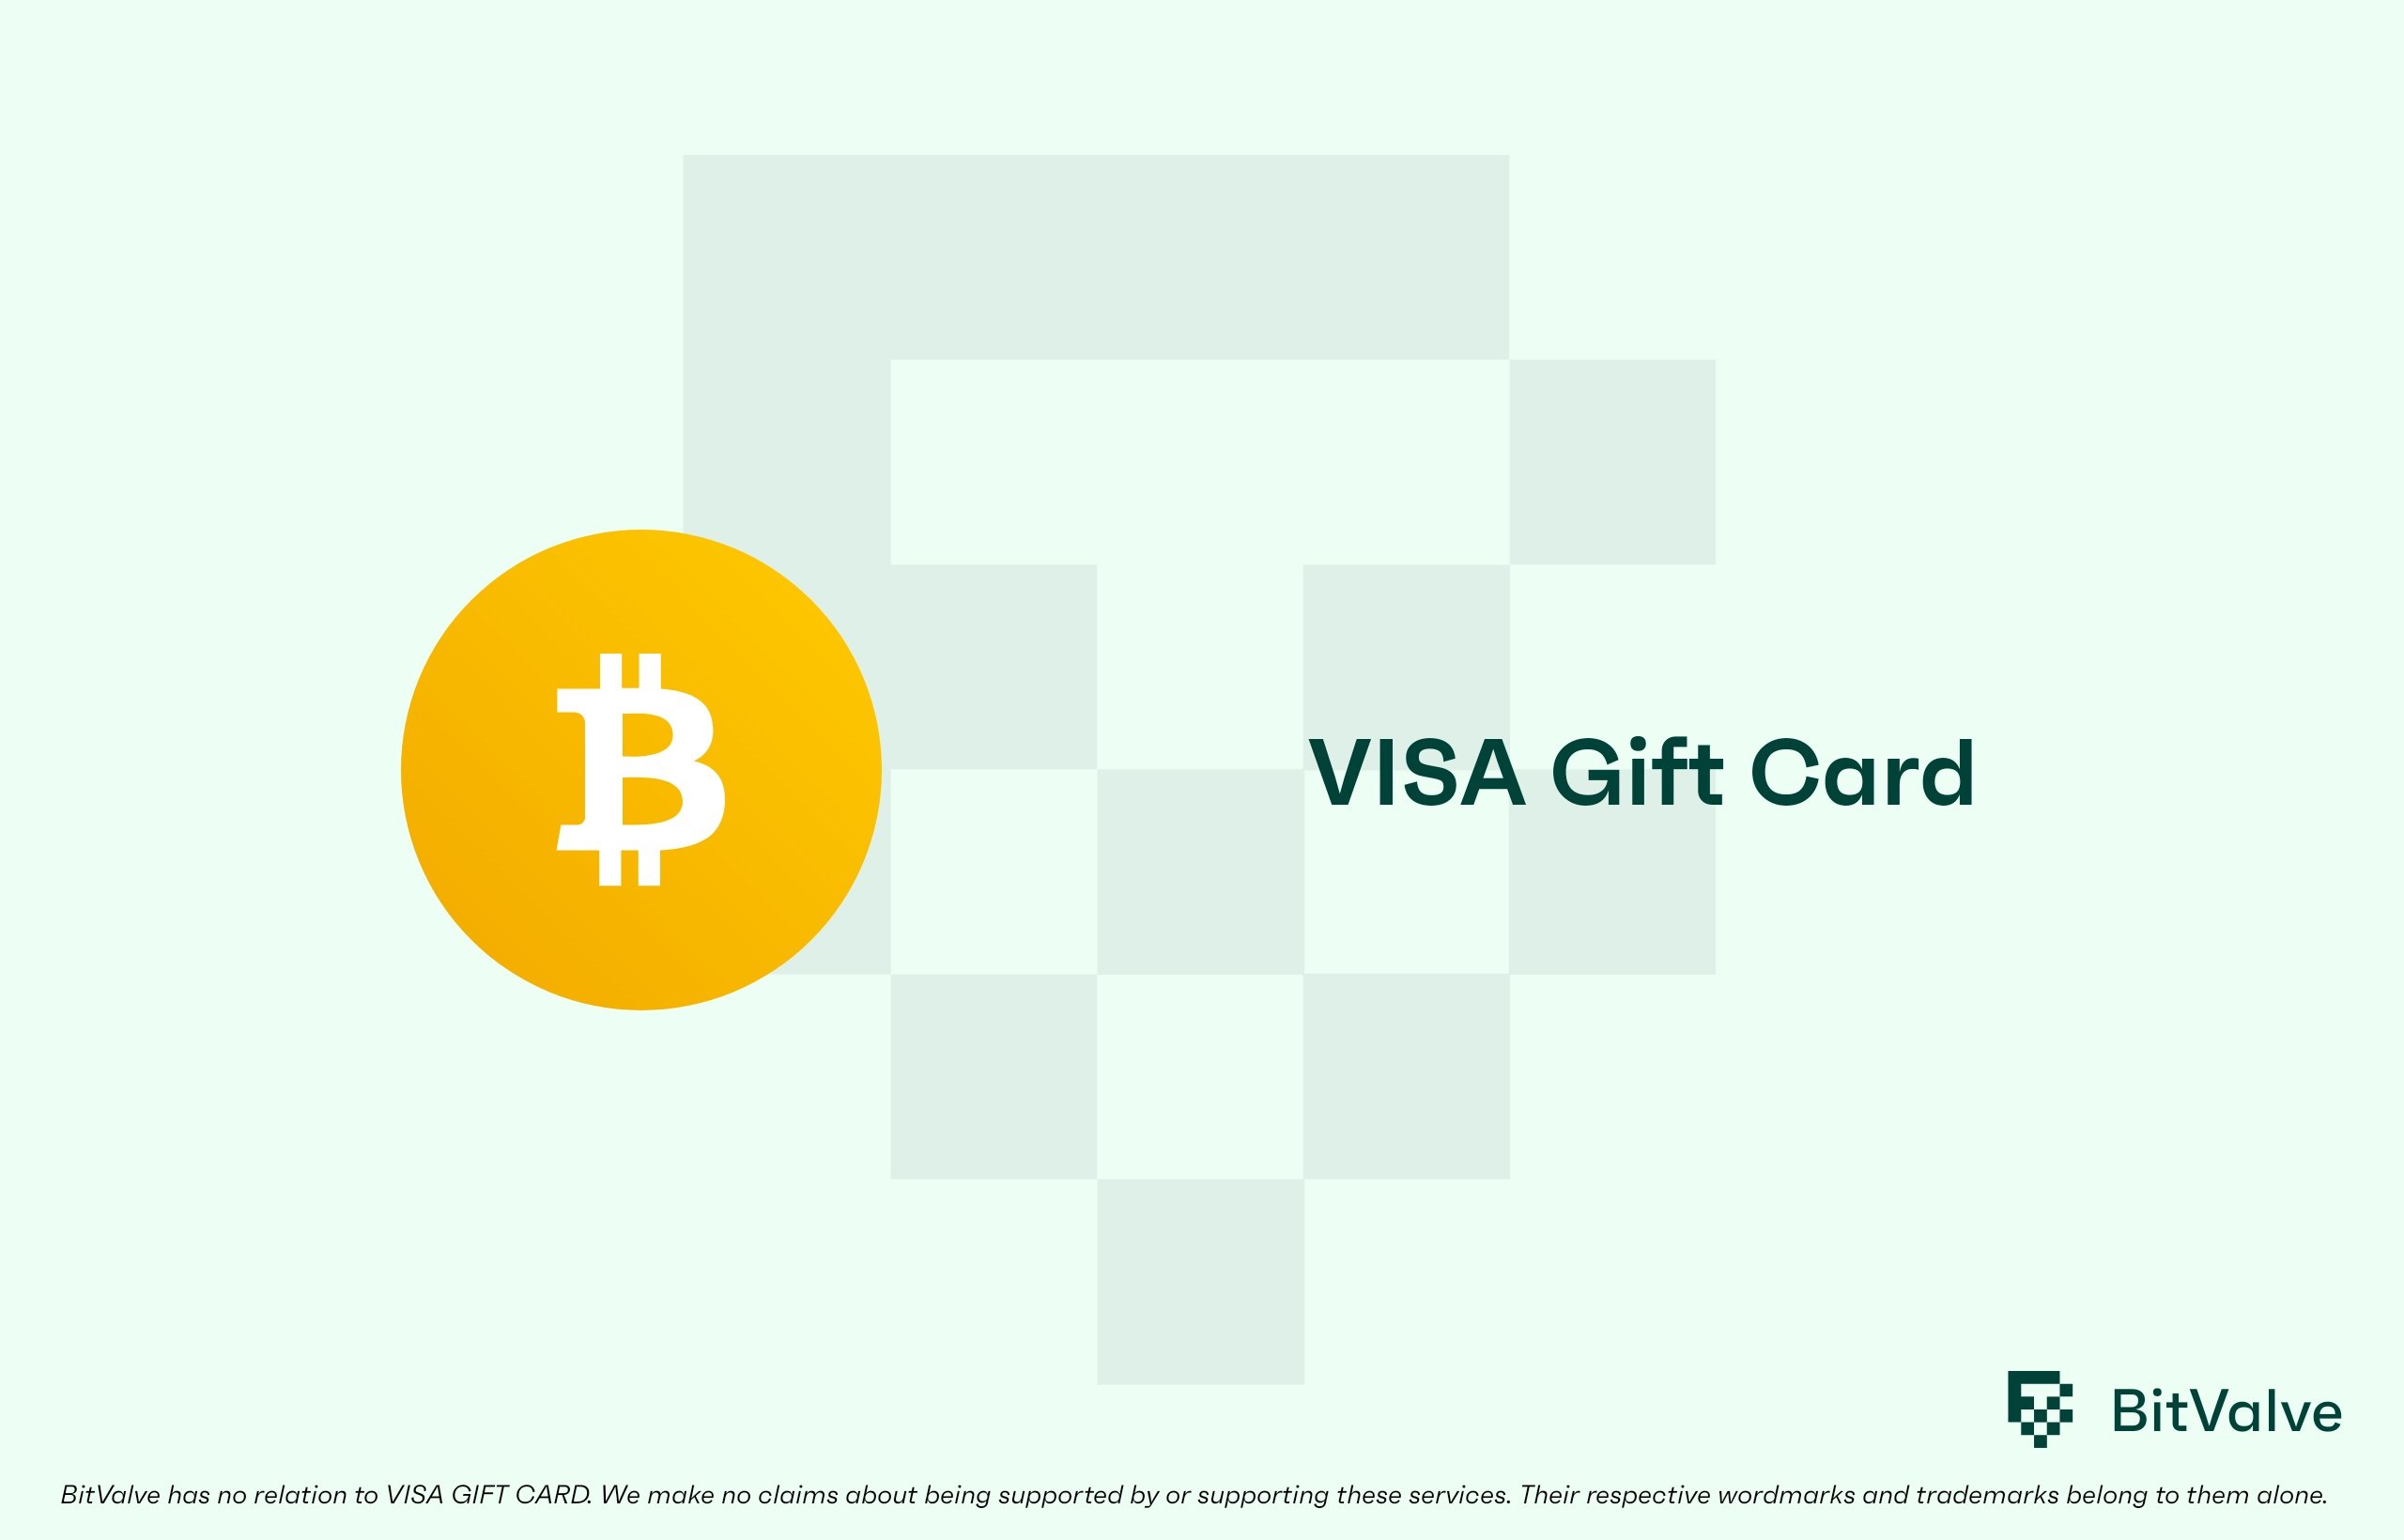 Buy Visa Card with Bitcoin | Jour Cards Store